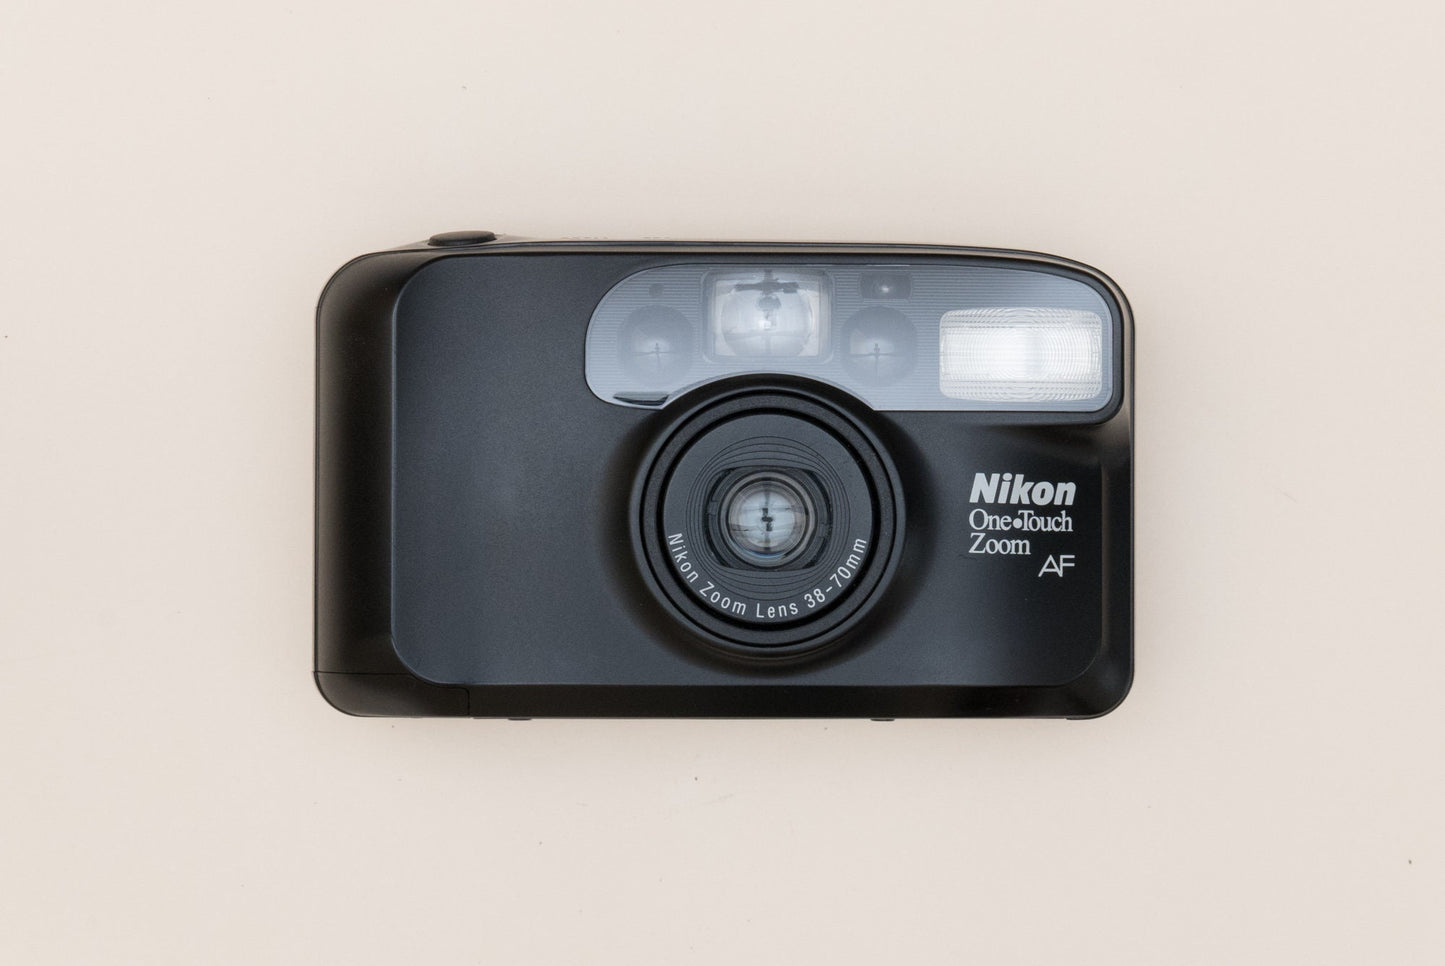 Nikon One Touch Zoom AF Compact 35mm Film Camera